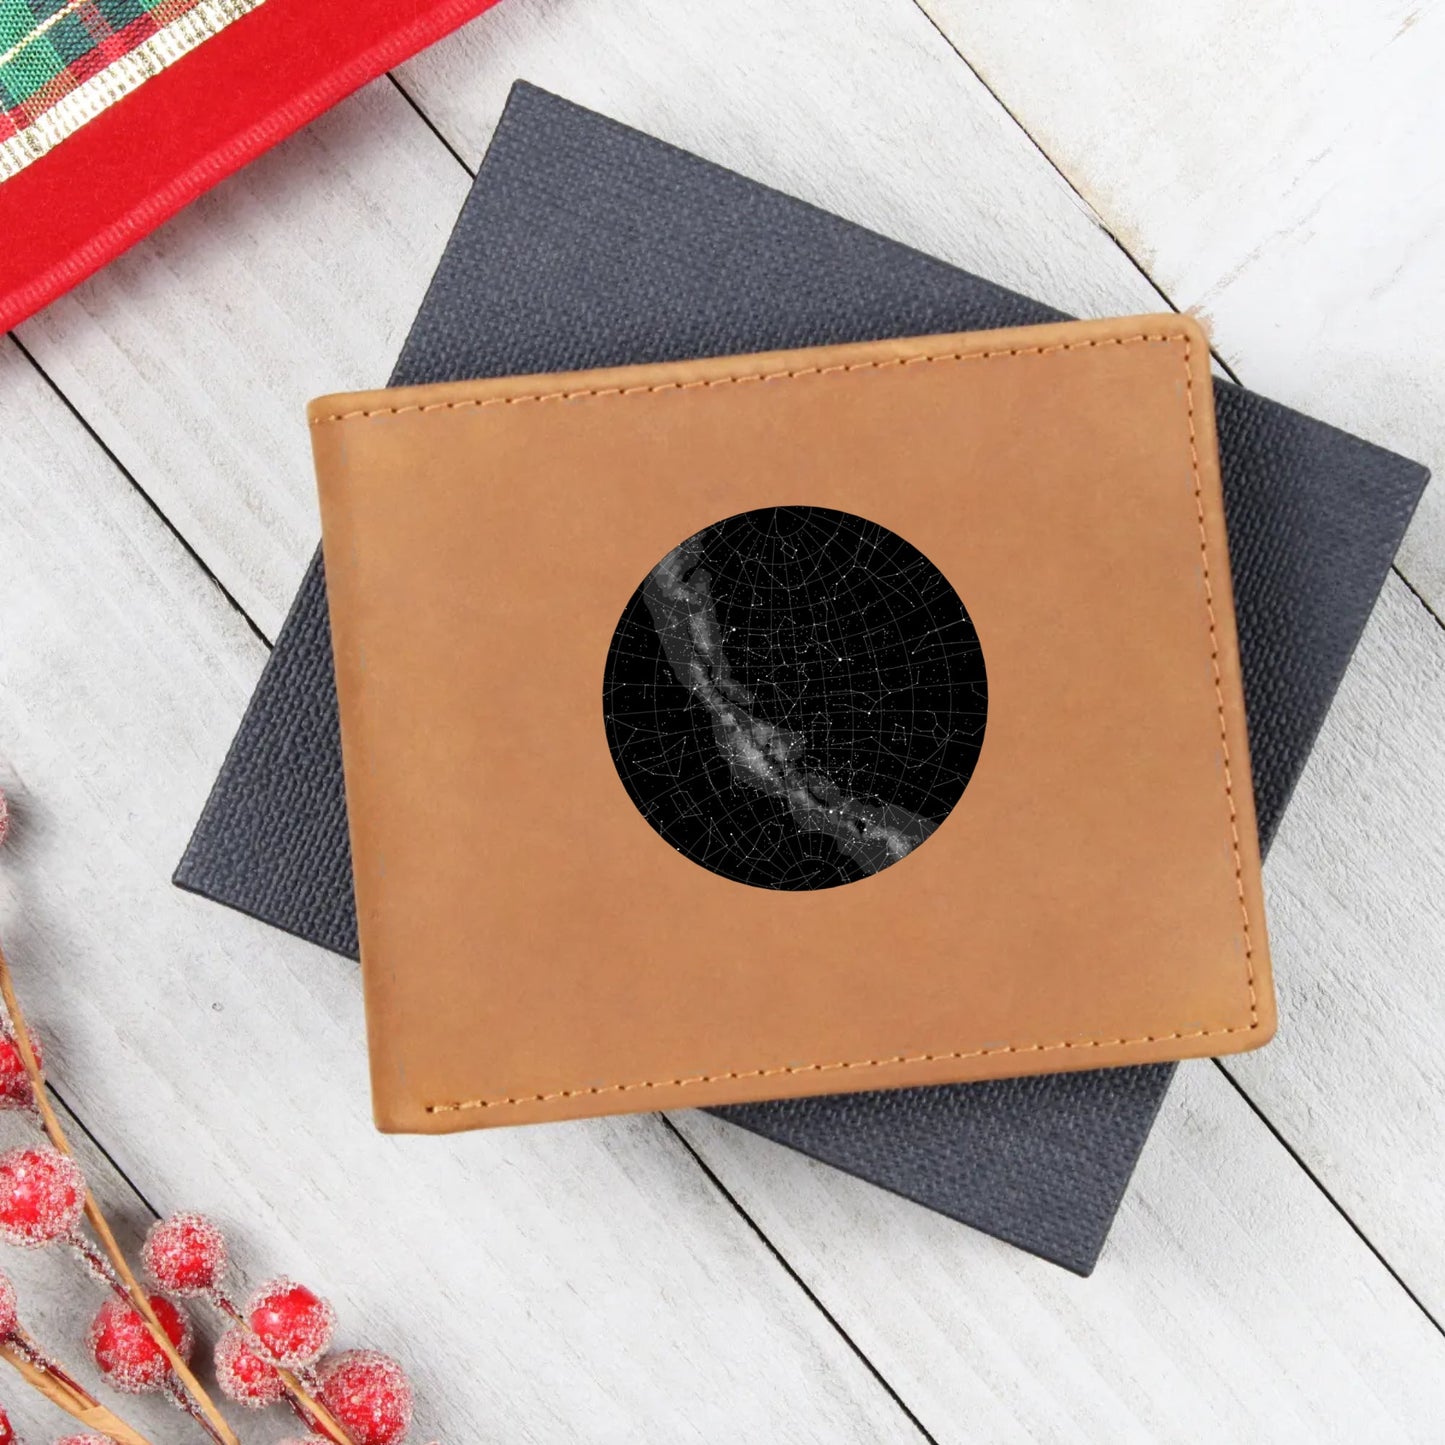 Star Map The Night We Met Graphic Leather Wallet